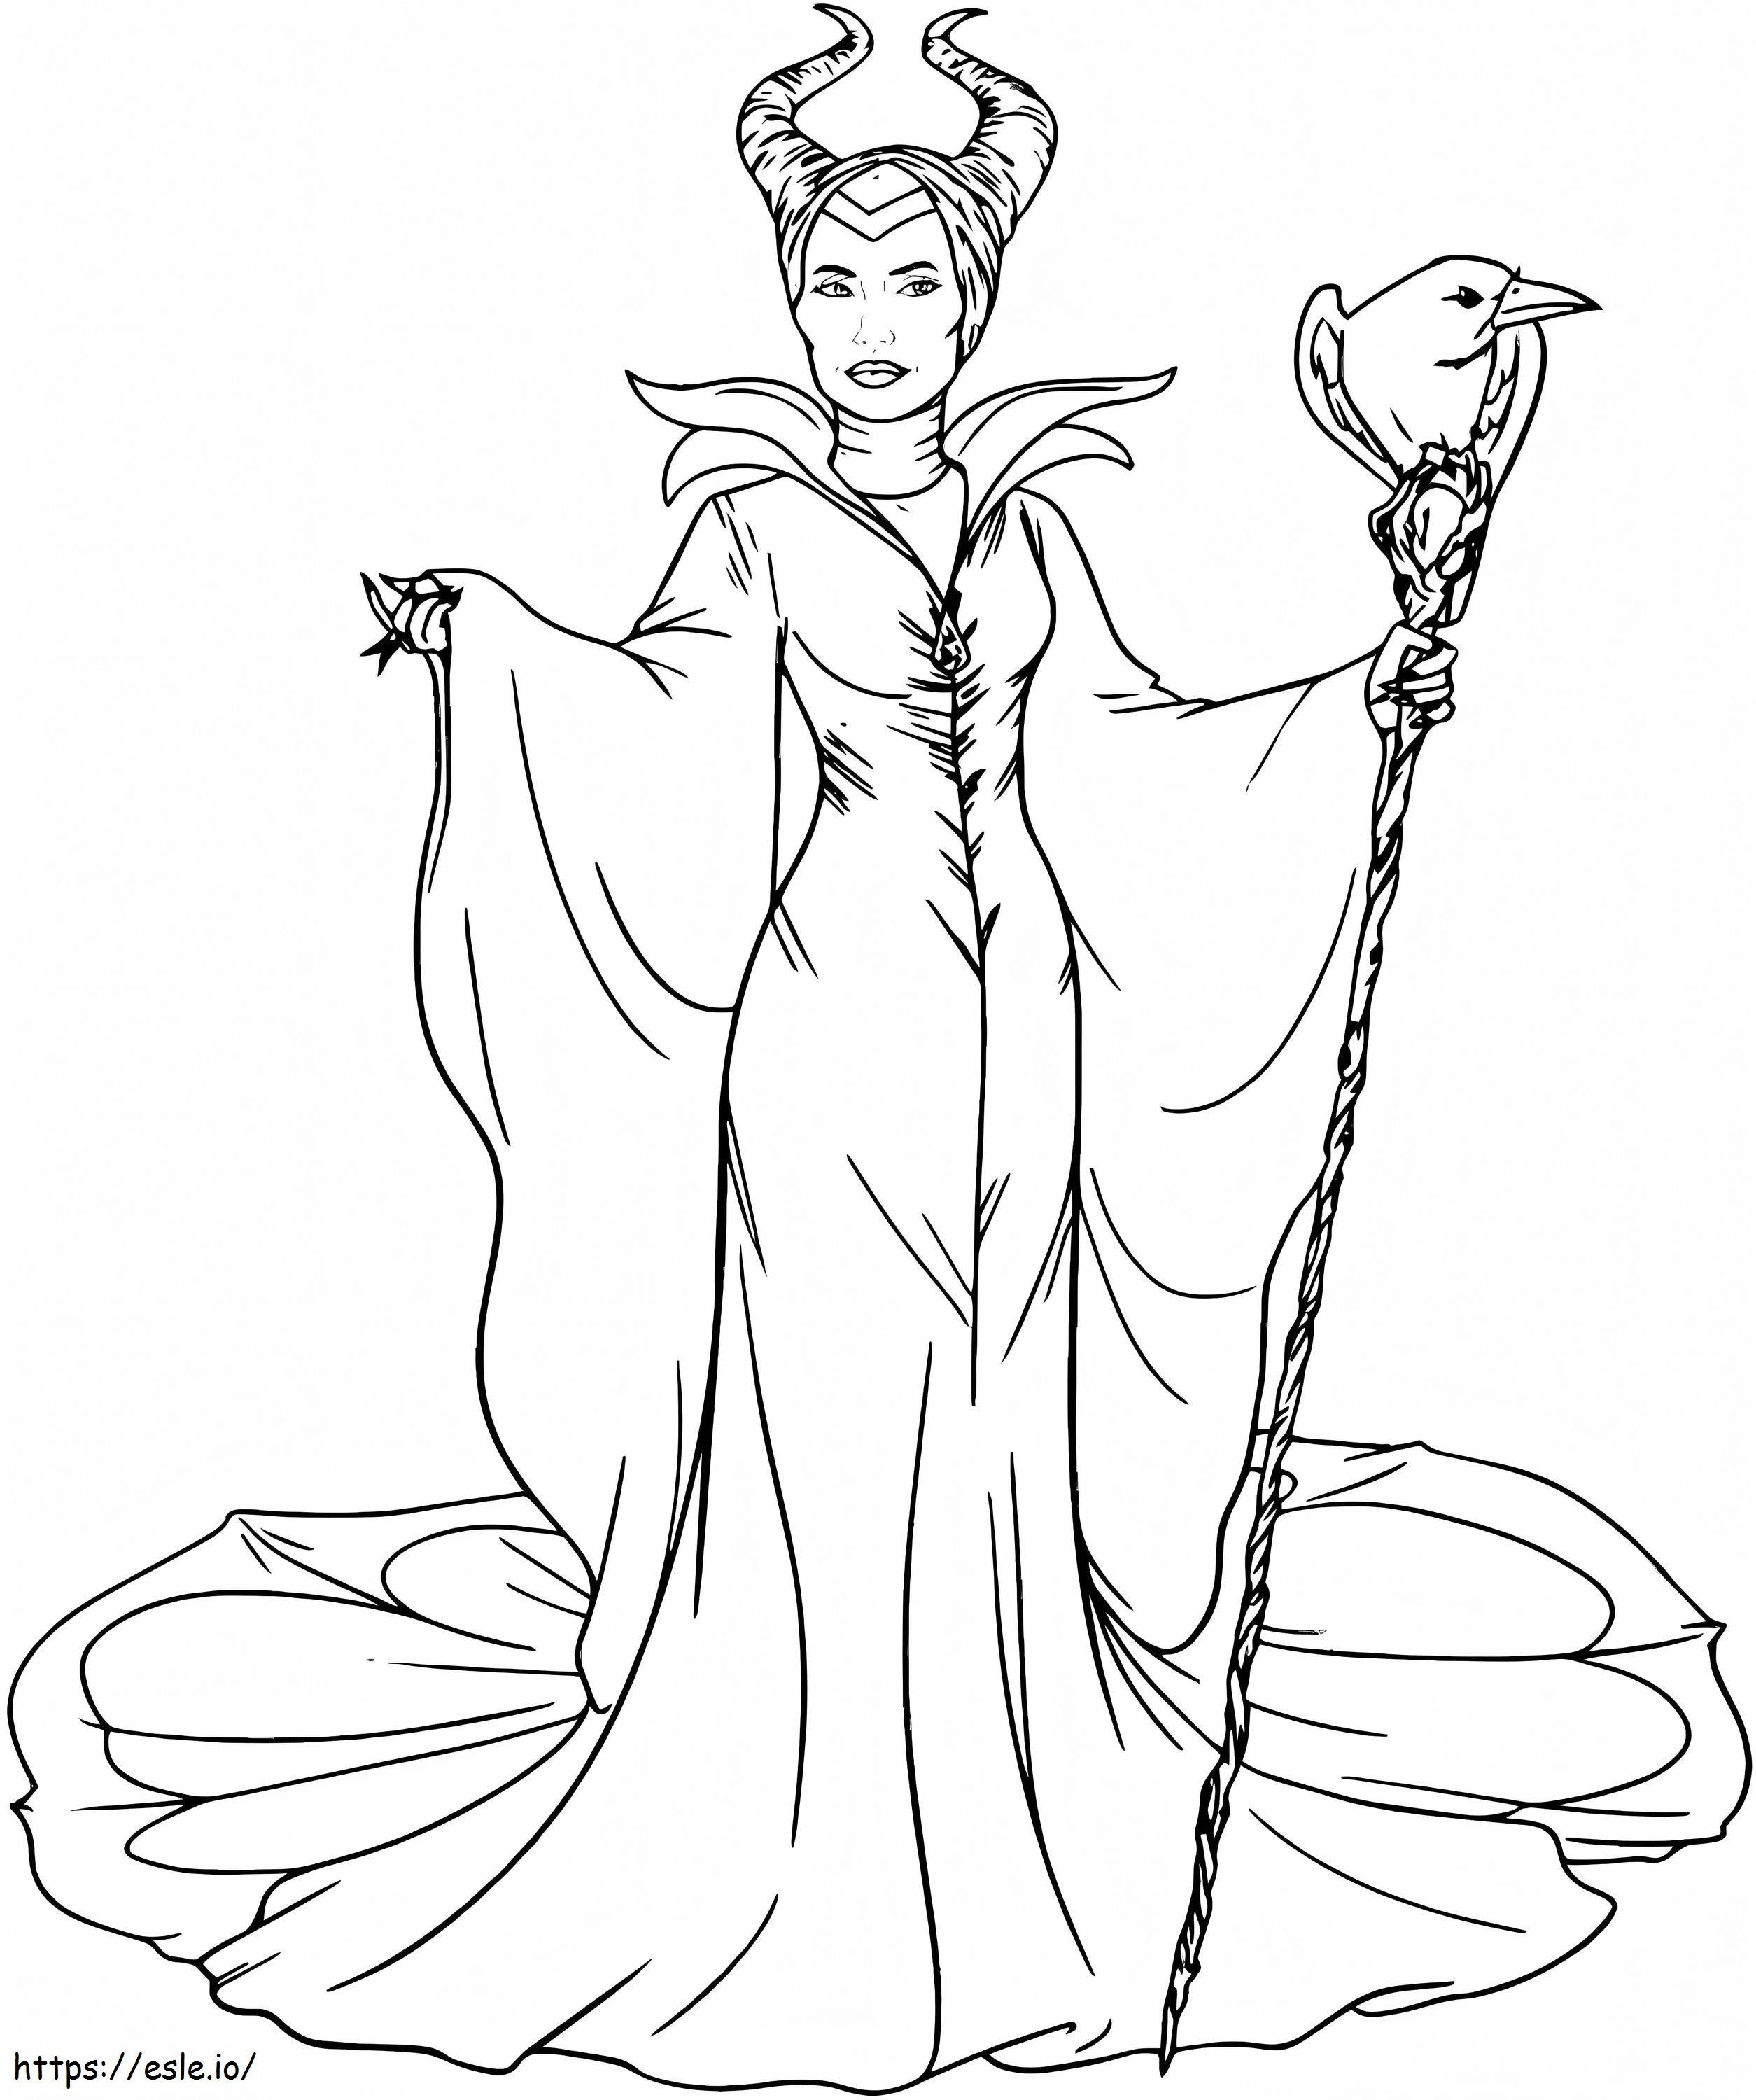 1567497193 Maleficent In Sleeping Beauty A4 coloring page